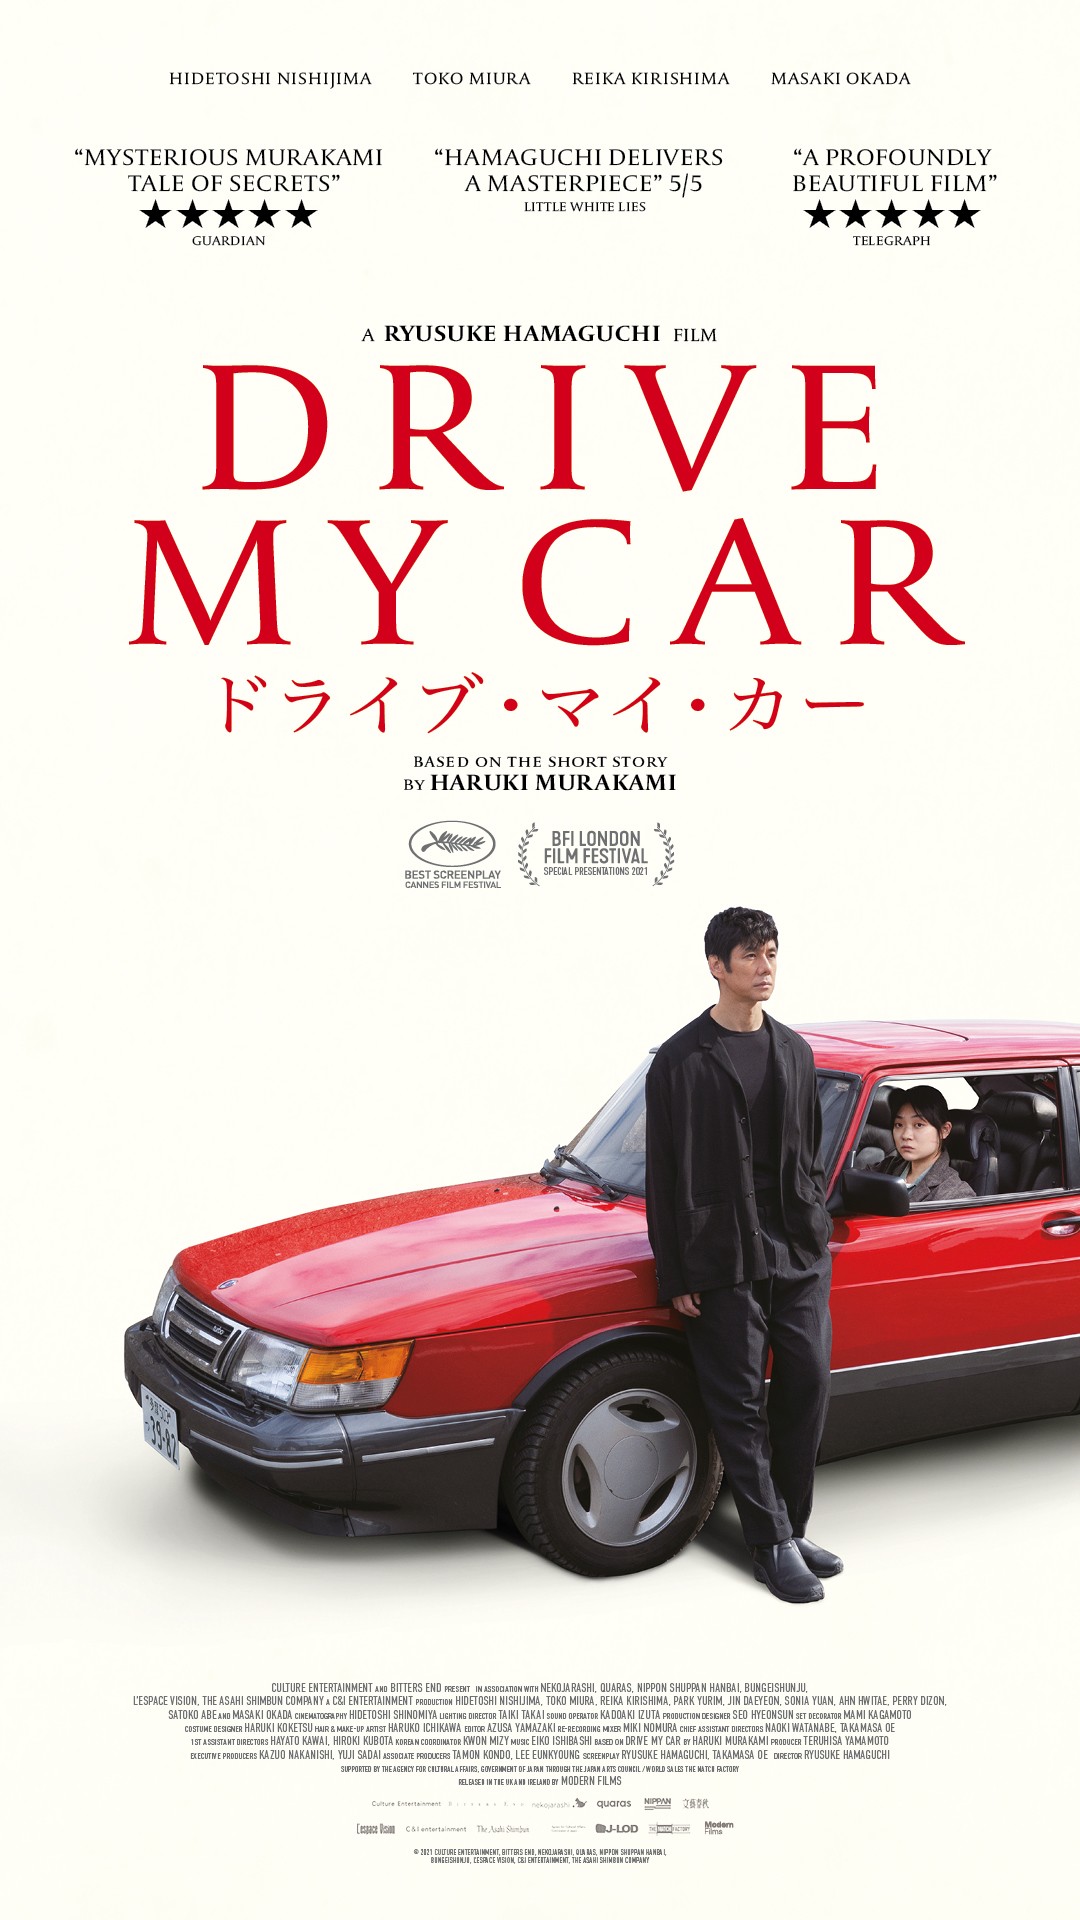 Ryûsuke Hamaguchi's WHEEL OF FORTUNE AND FANTASY, DRIVE MY CAR, EVIL DOES NOT EXIST